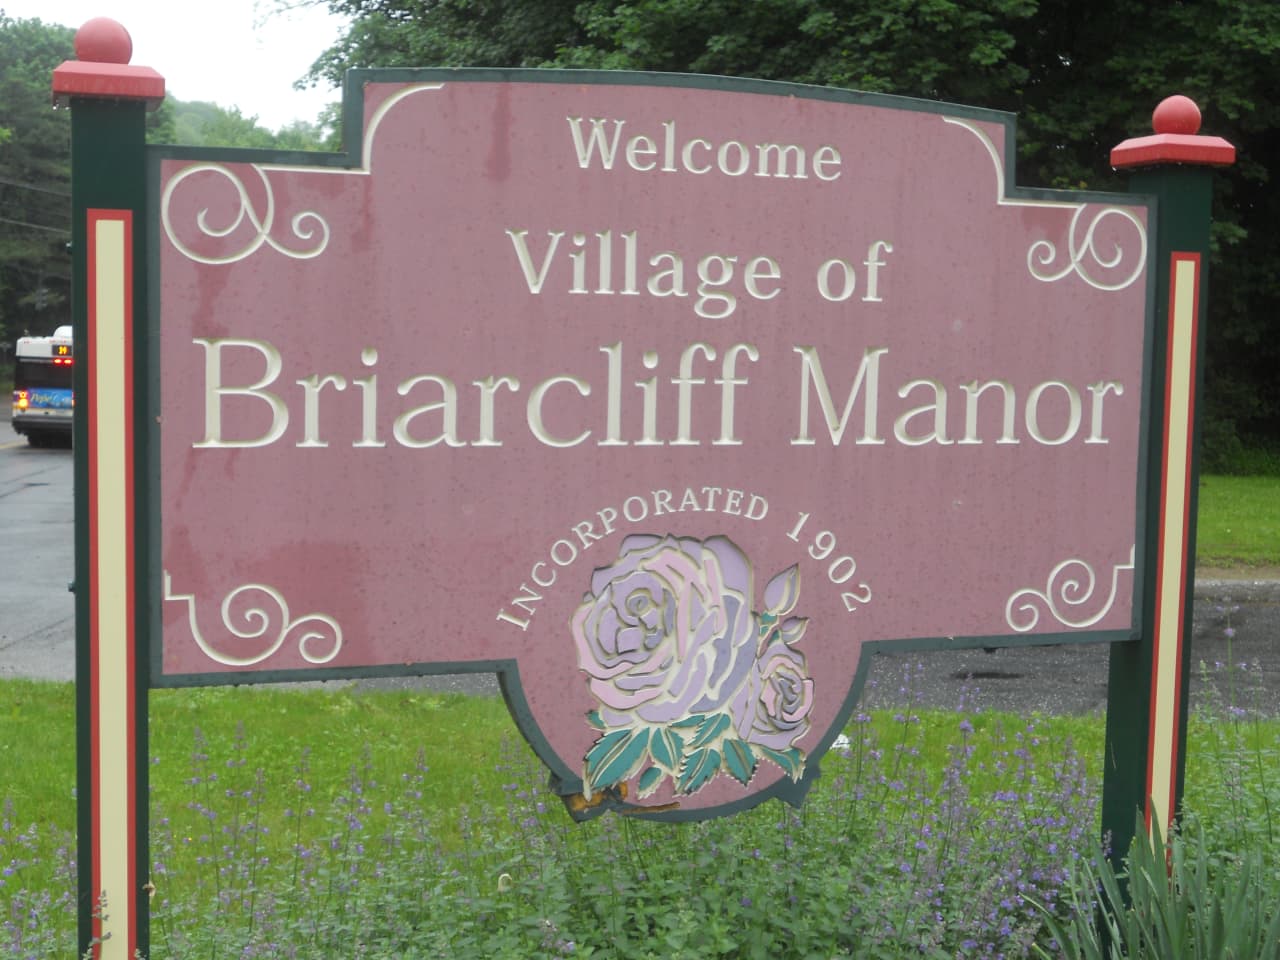 The Village of Briarcliff Manor and the Town of Ossining want to discontinue the lawsuit regarding proposed annexation of Election Districts 16 and 20.